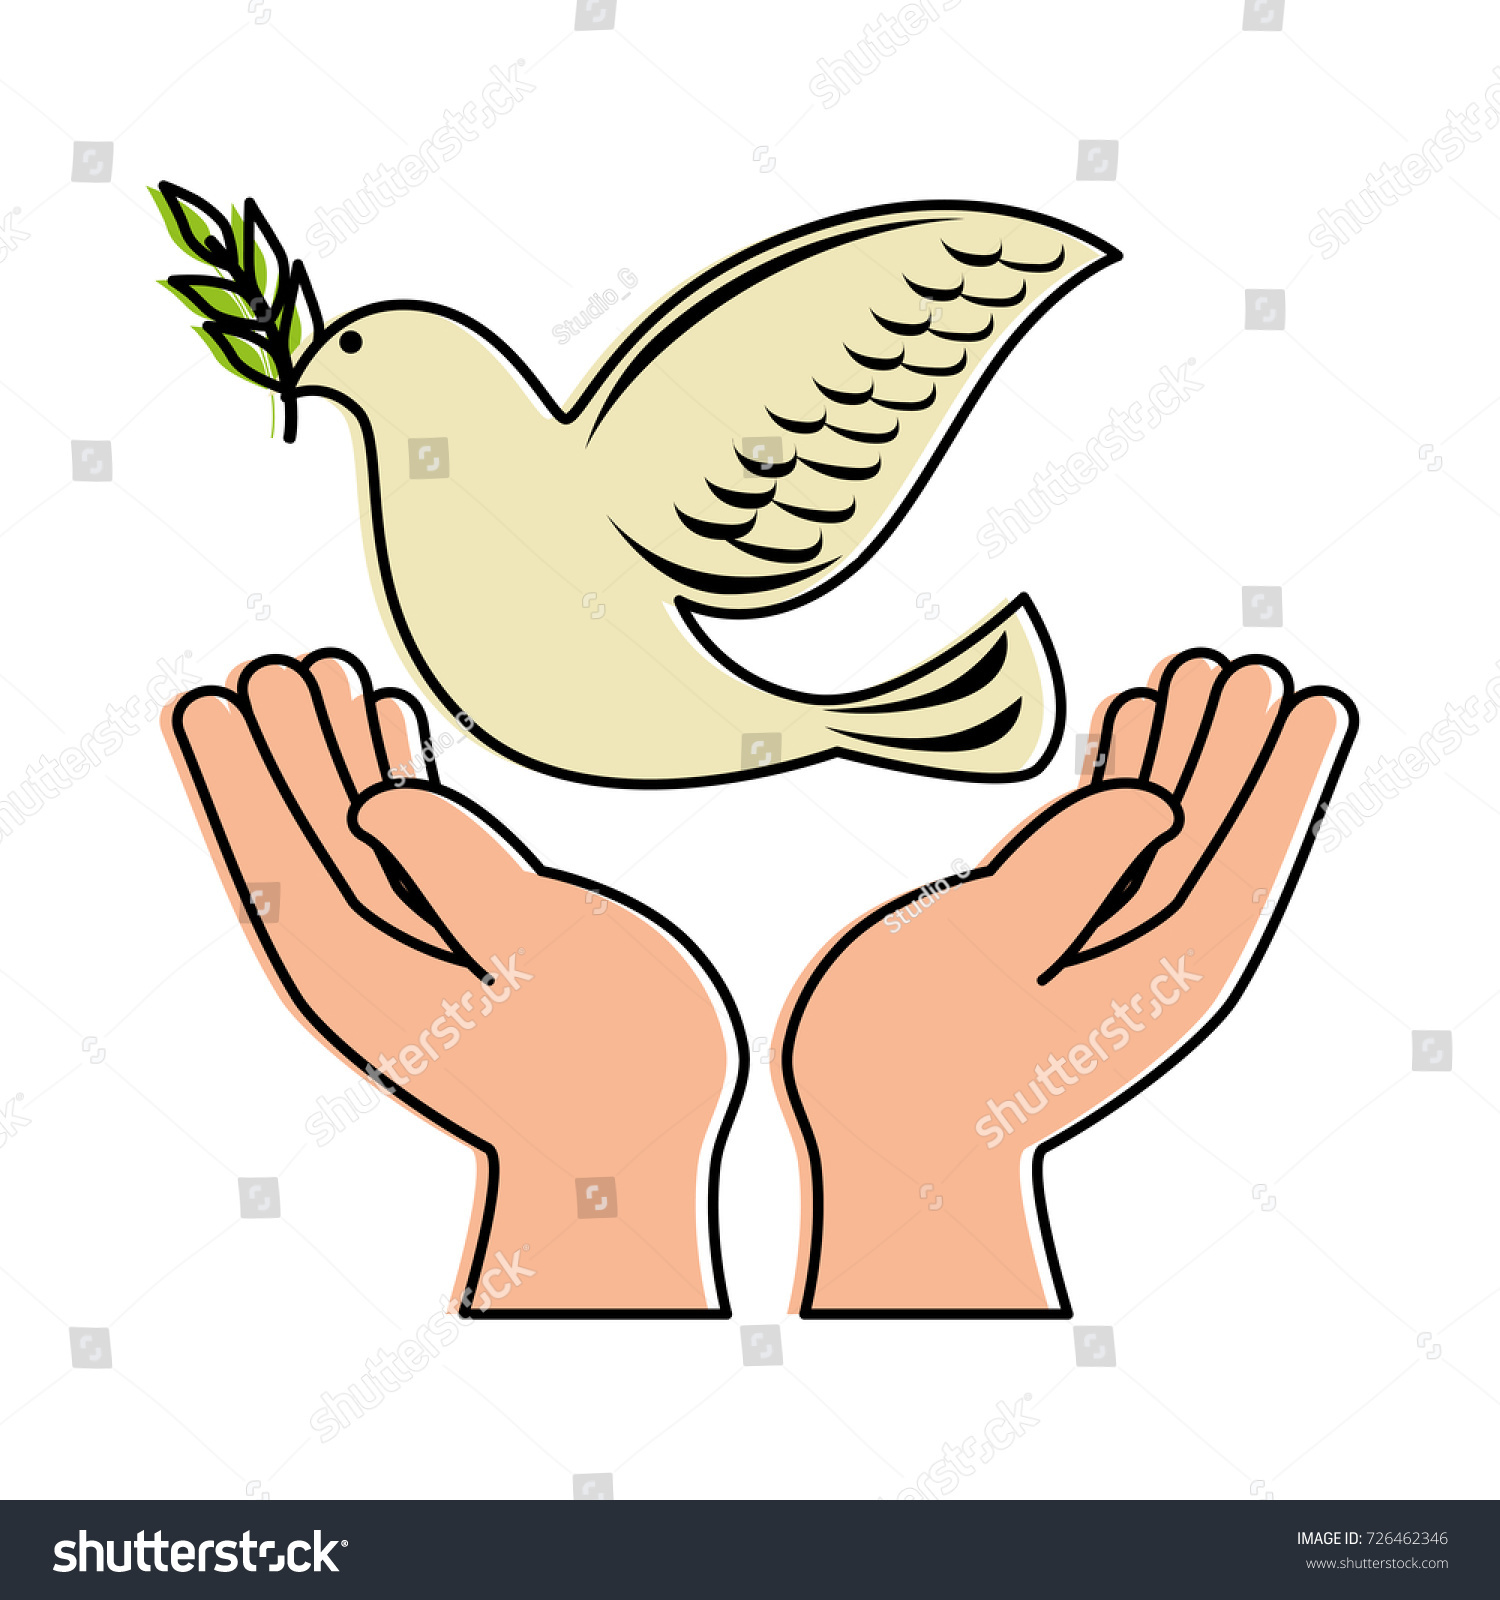 Hands Human Dove Peace Stock Vector (Royalty Free) 726462346 | Shutterstock